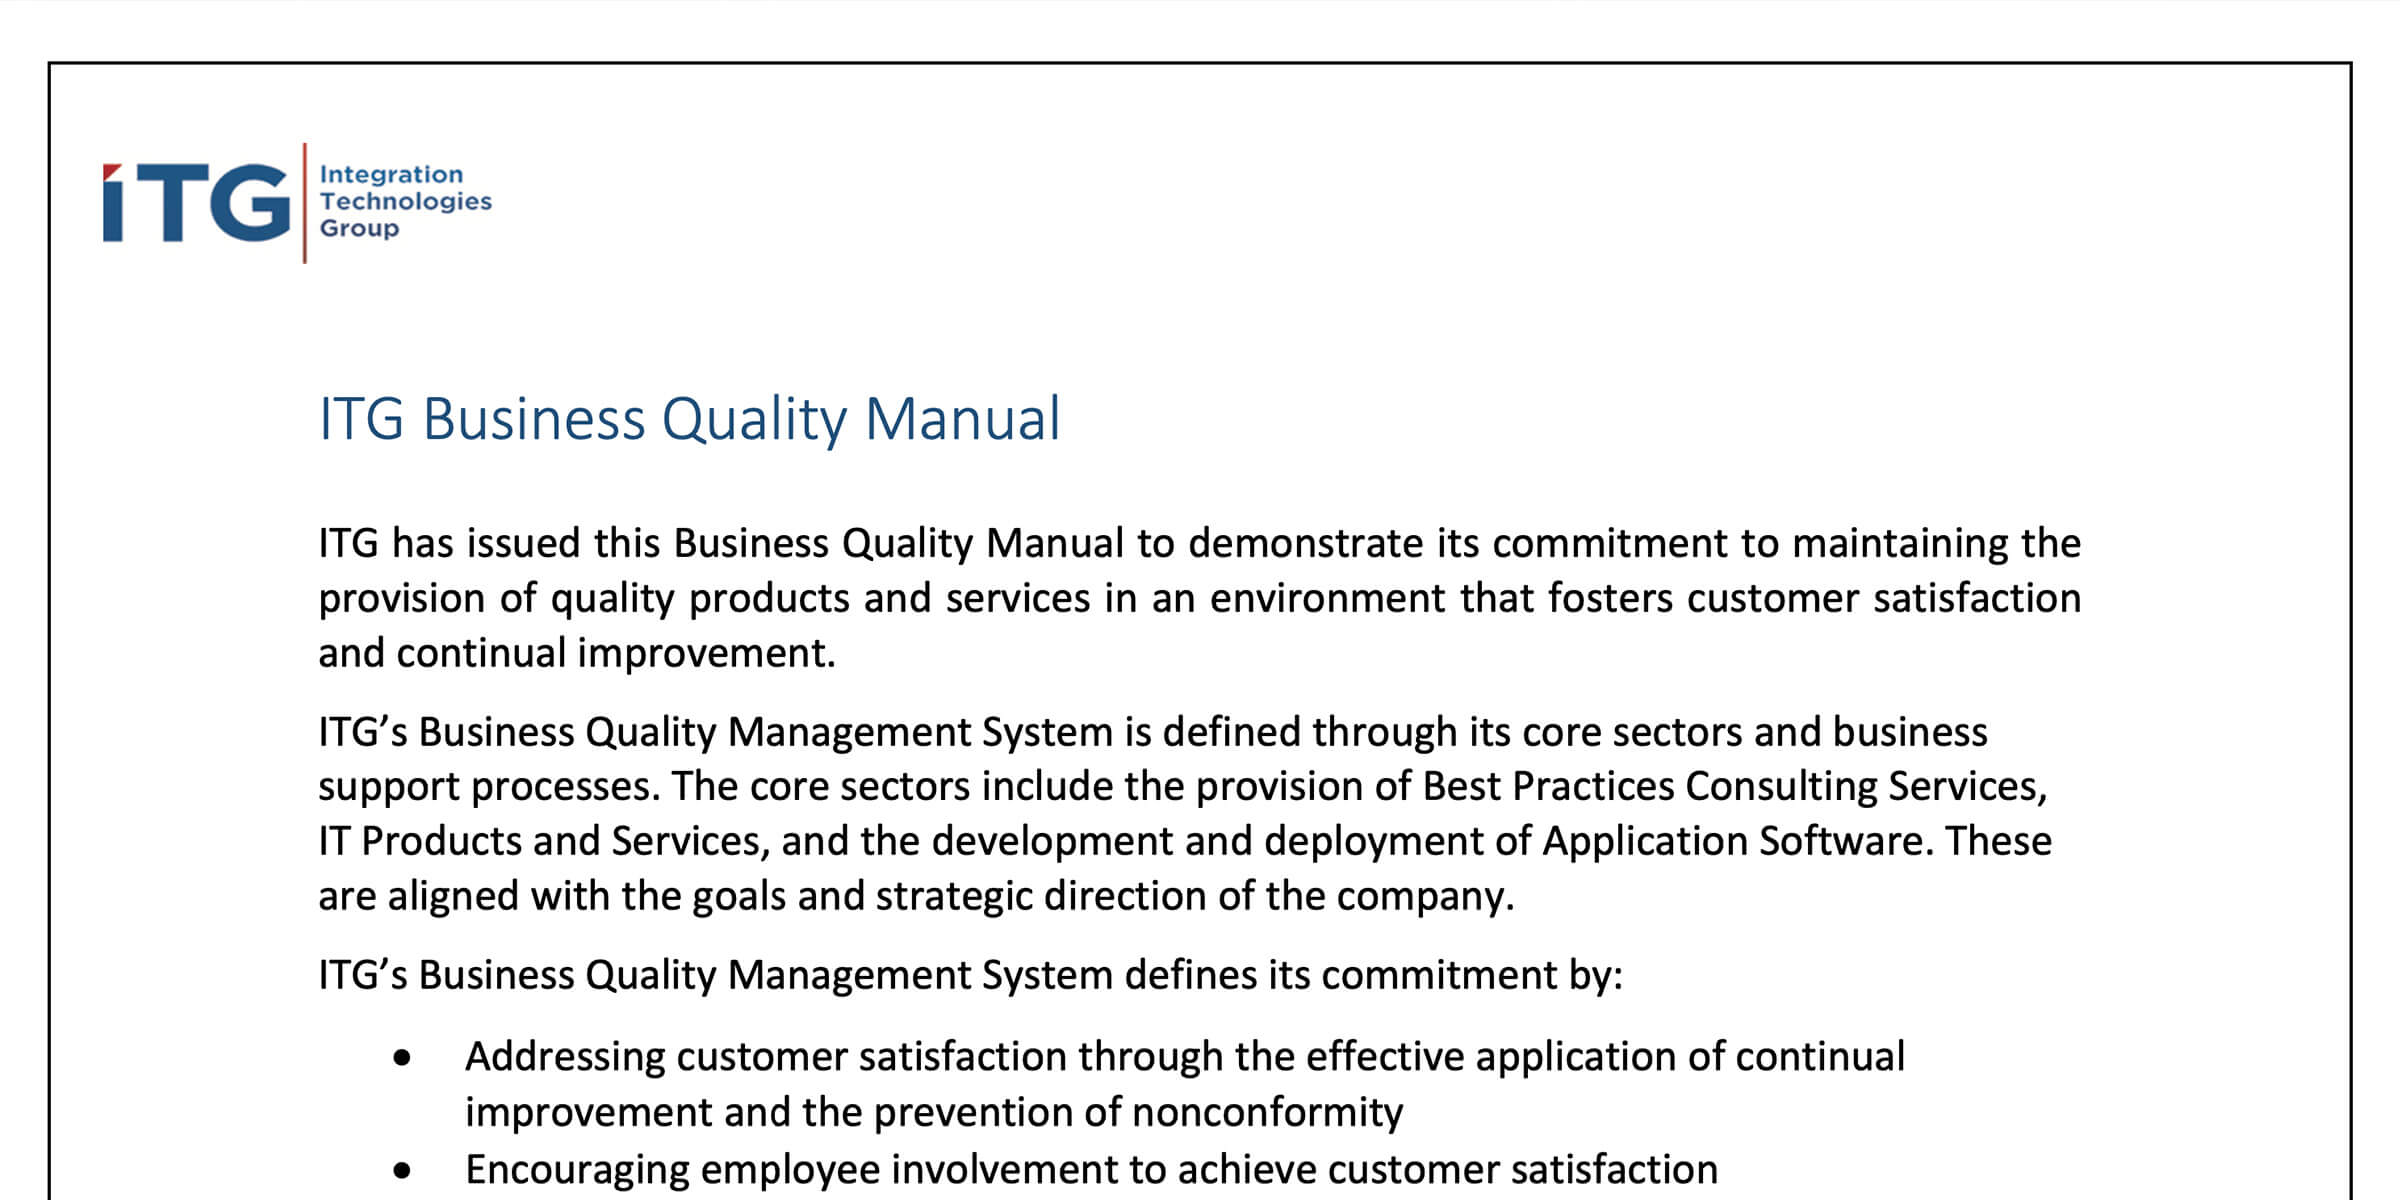 ITG Business Quality Manual